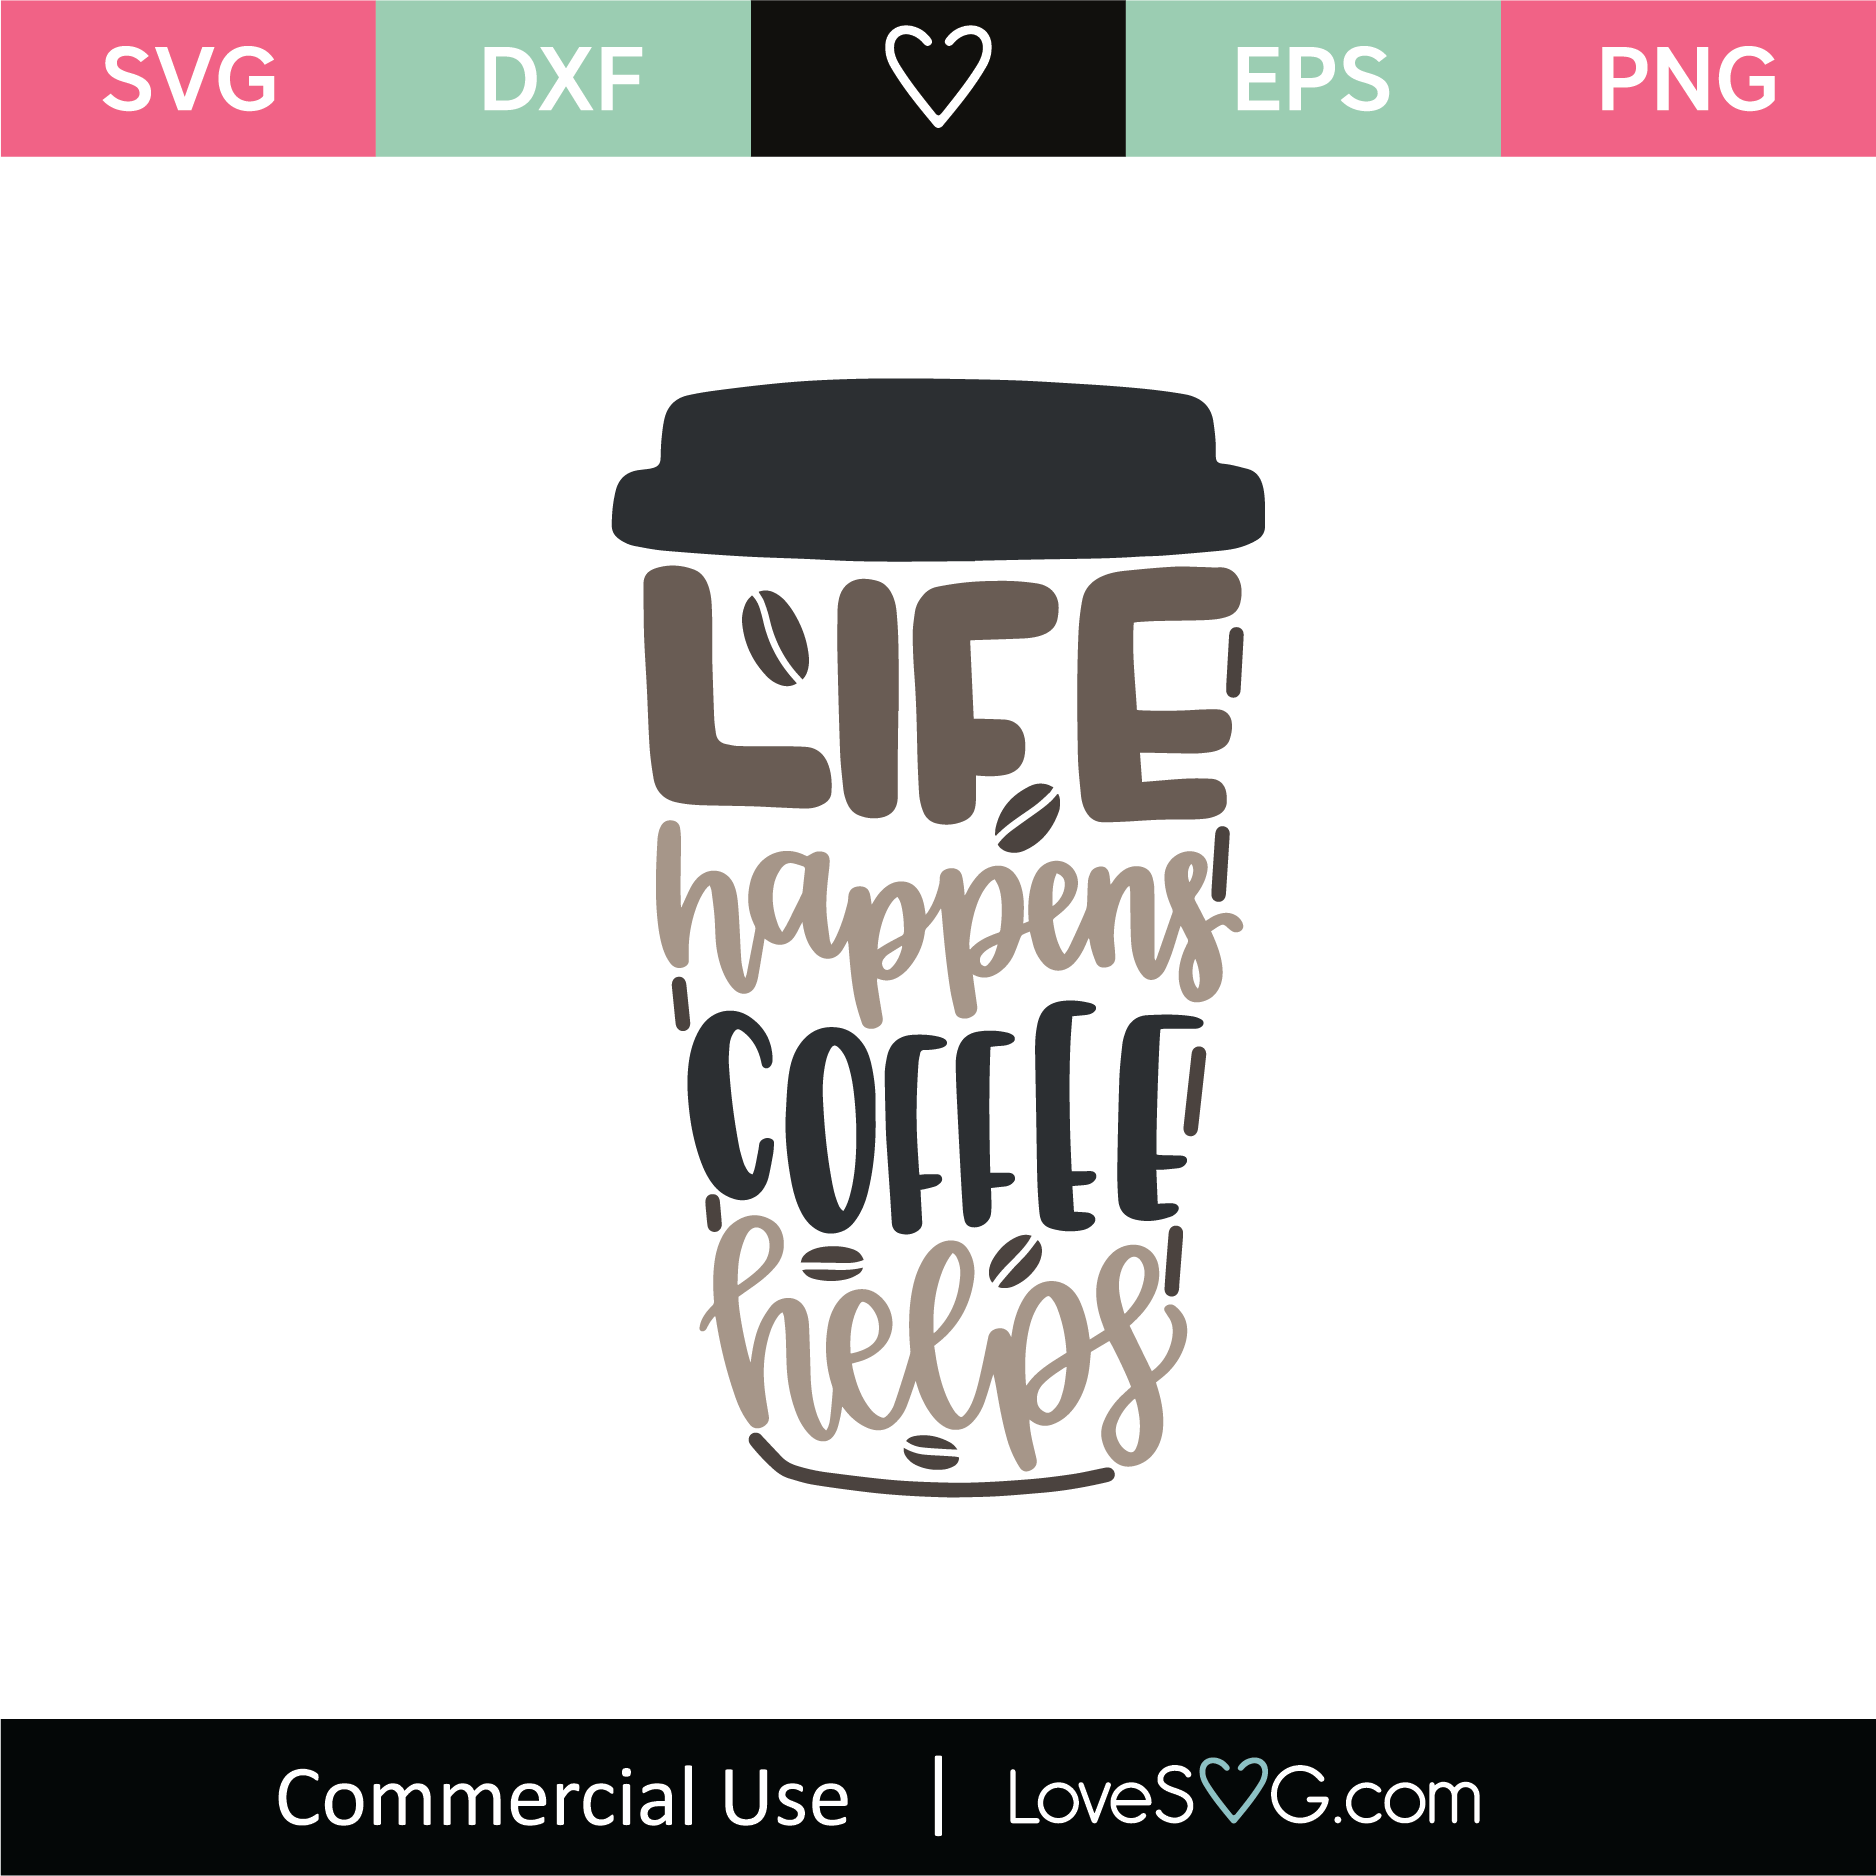 funny coffee svg file Coffee SVG Design File How Do I Take My Coffee Seriously Very Seriously SVG coffee design Coffee Lover SVG Bundle